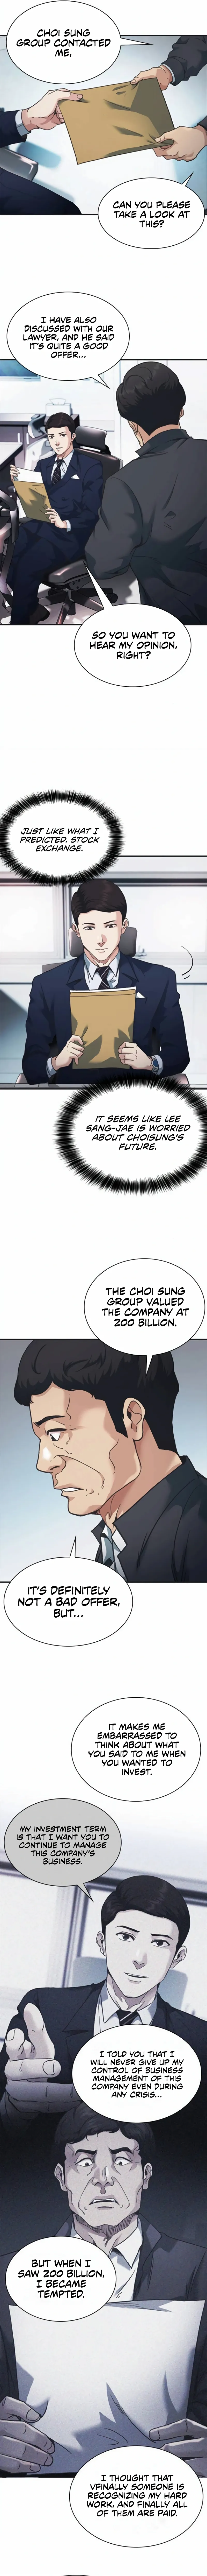 Chairman Kang: The Newcomer Chapter 29 page 7